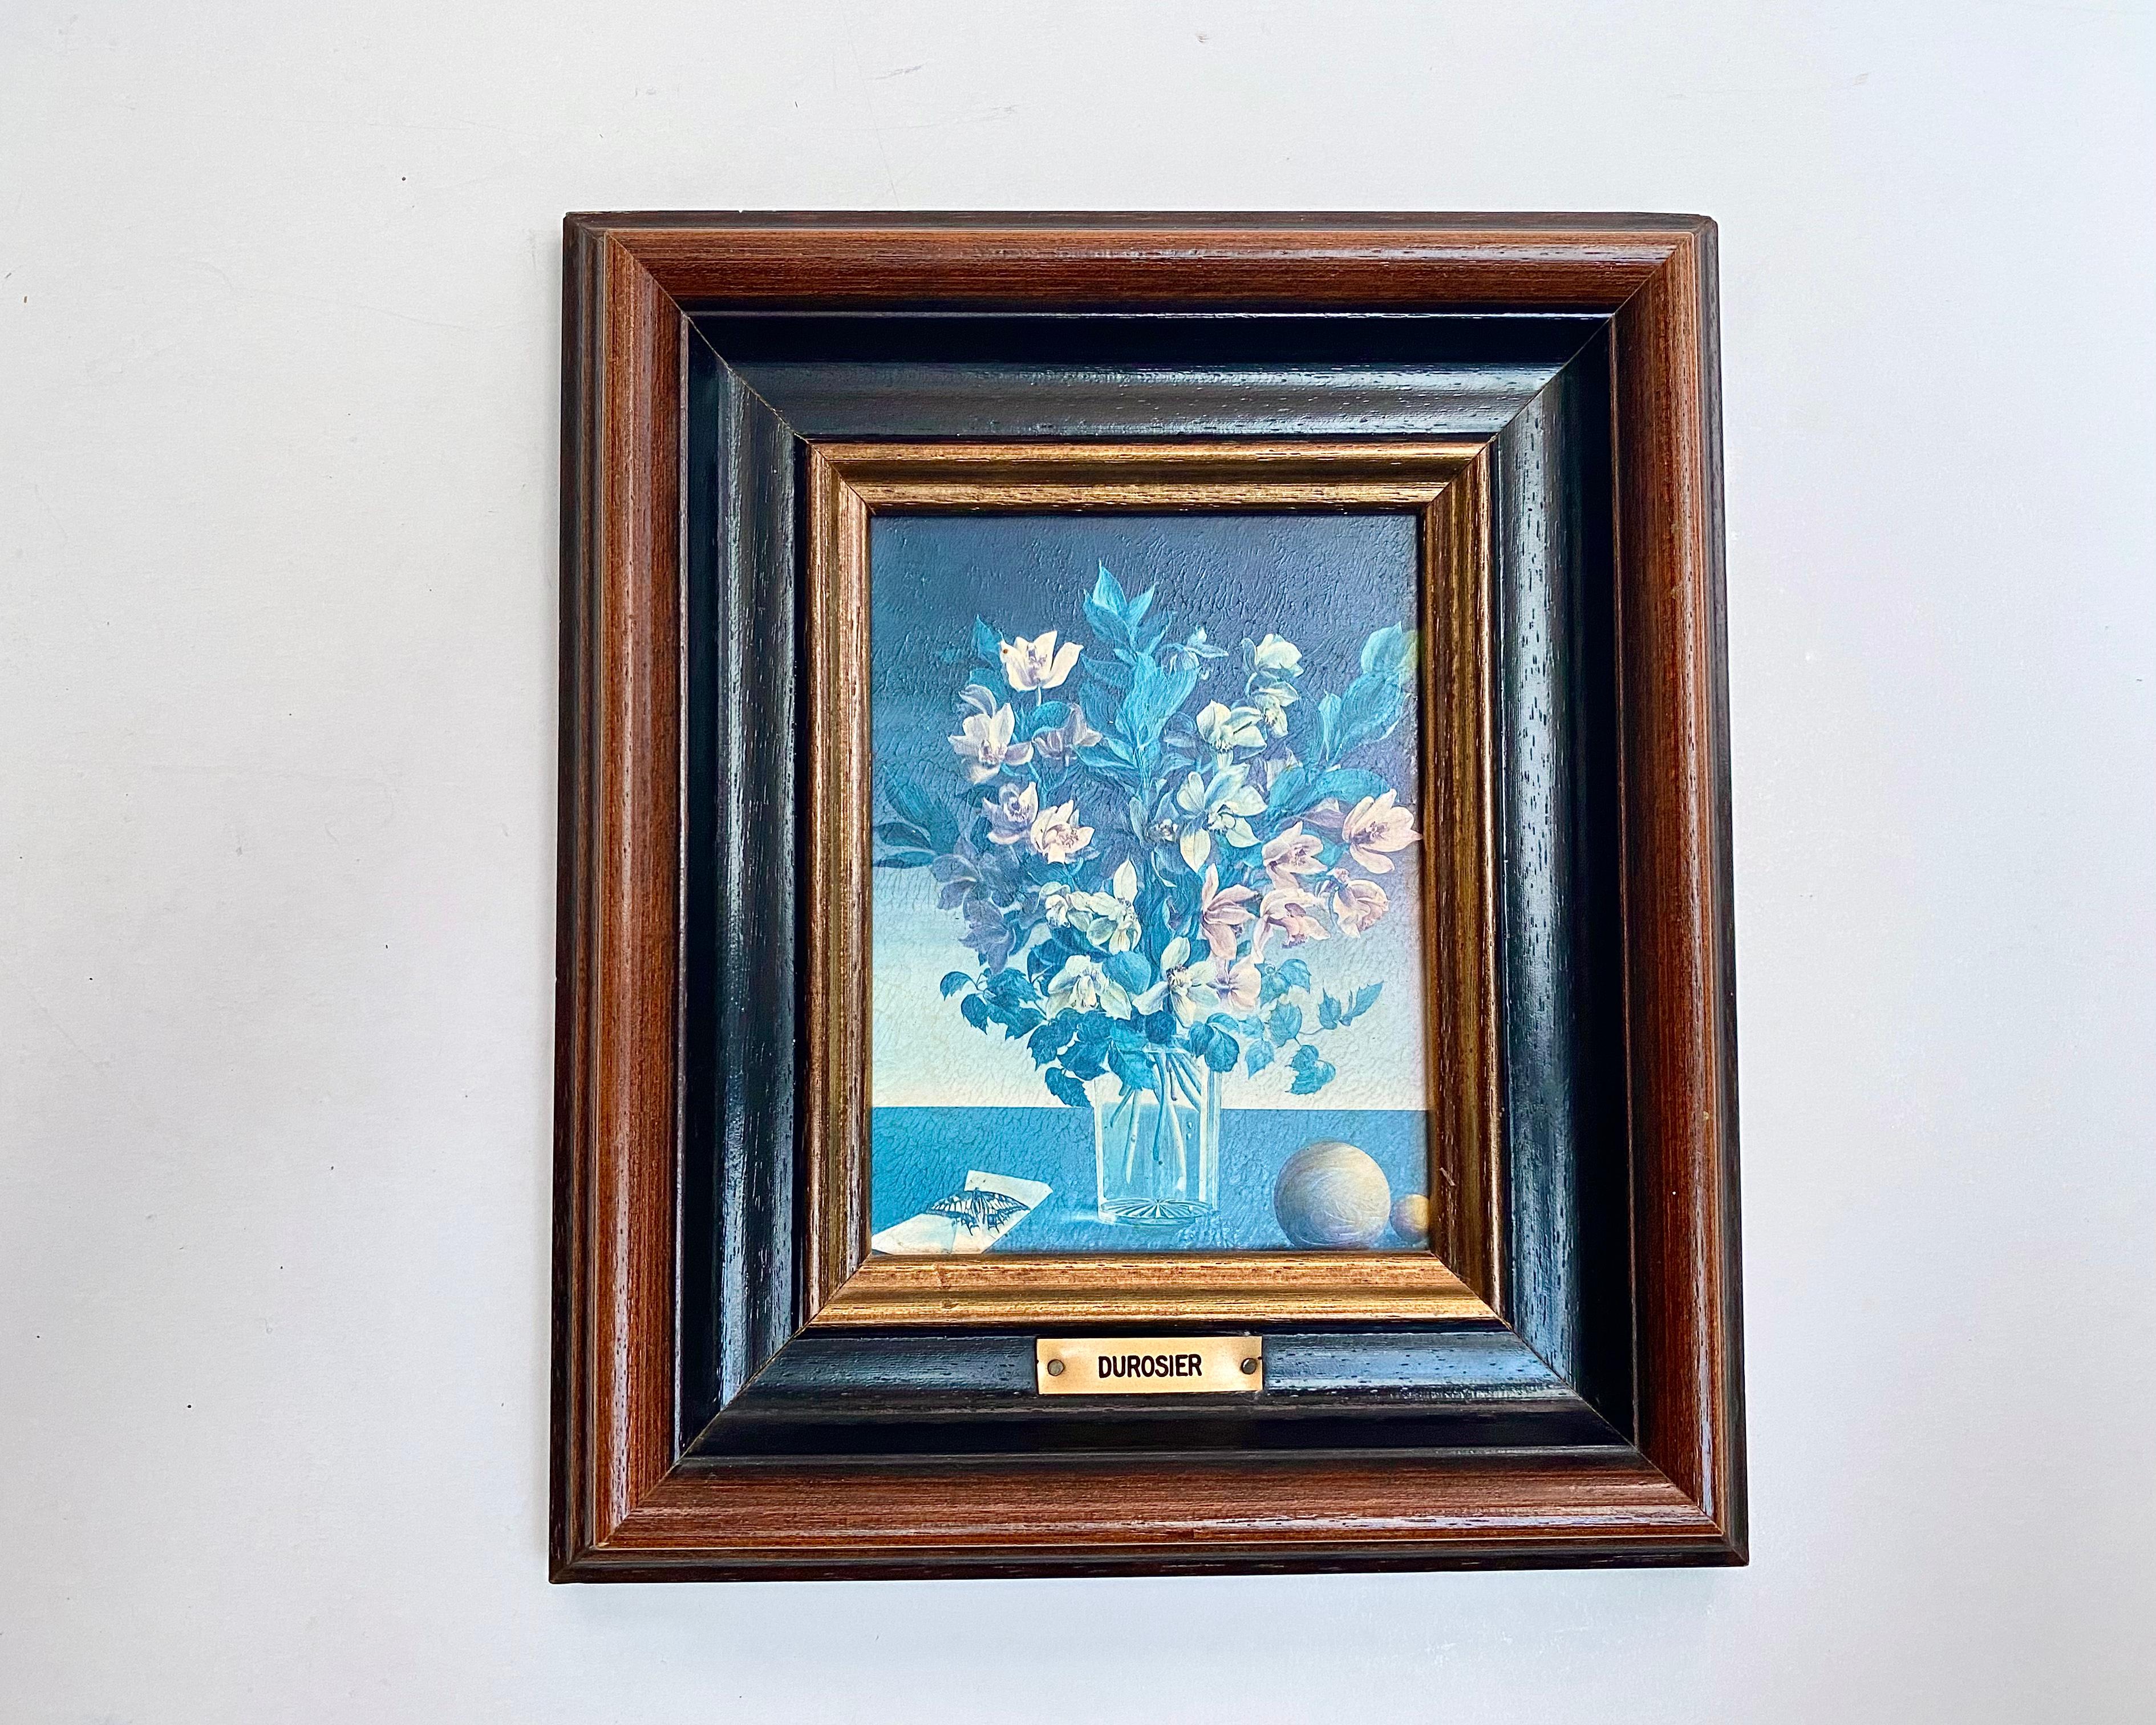 Floral Framed Wall Art Bouquet Vase of Flowers Framed By Francine Durosier Vintage Oil Painting Signed Still Life Painting Flowers in Vase

Vintage picture in a beautiful wooden frame with tinting and gilding along the inner edge from Germany.

The